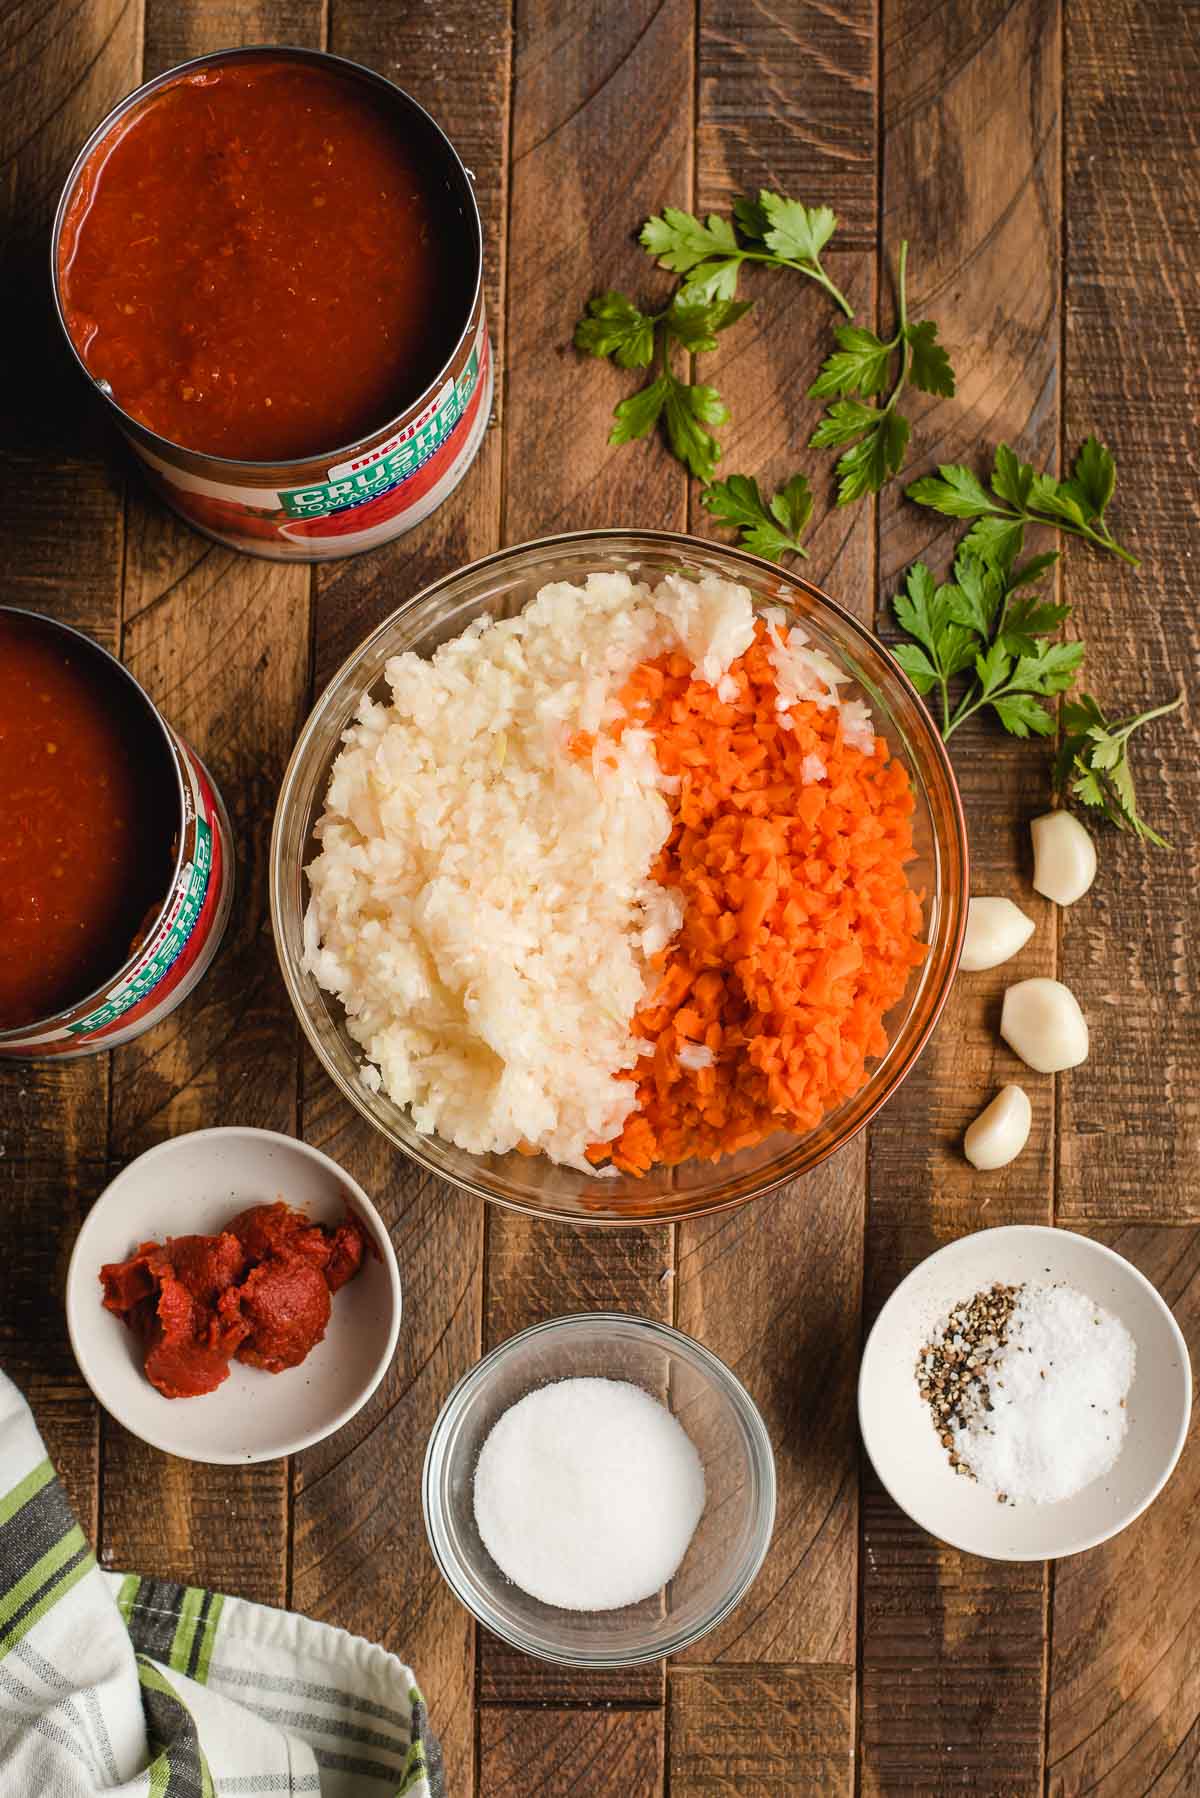 Ingredients for homemade spaghetti sauce shown in bowls.